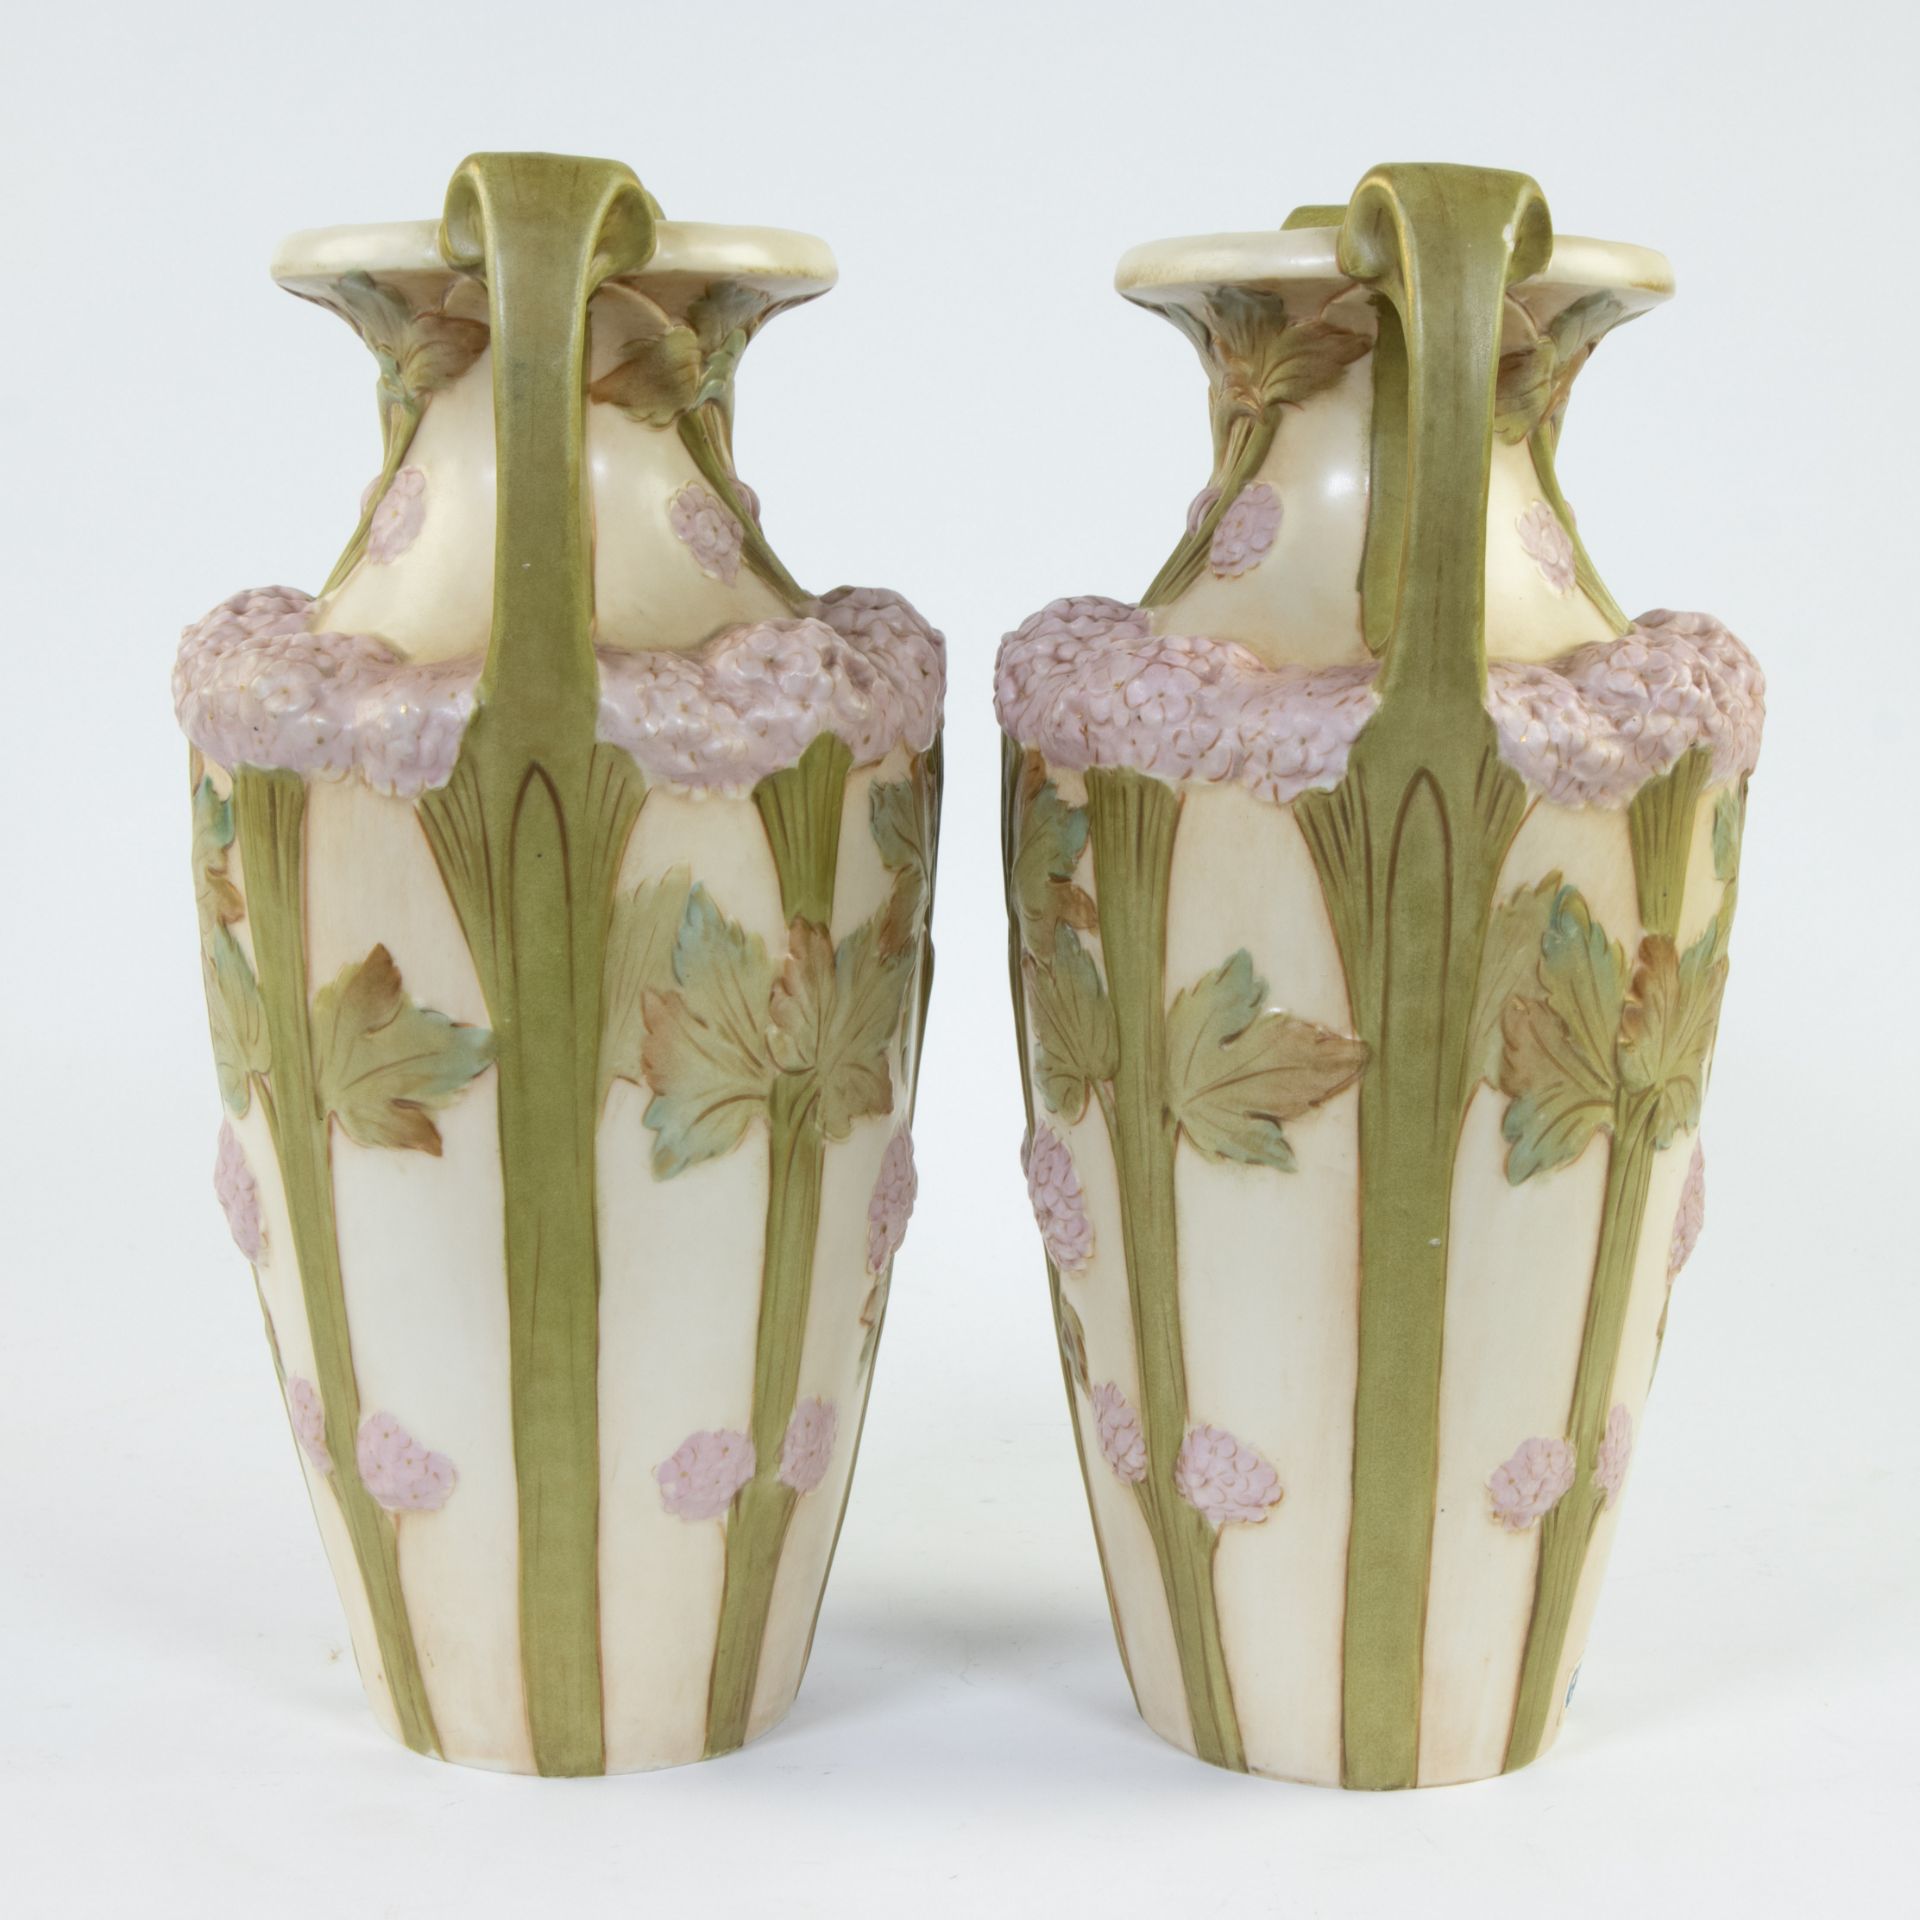 Pair of Art Nouveau Royal Dux vases with decor of stems with flowers, marked and a vide poche with d - Image 3 of 9